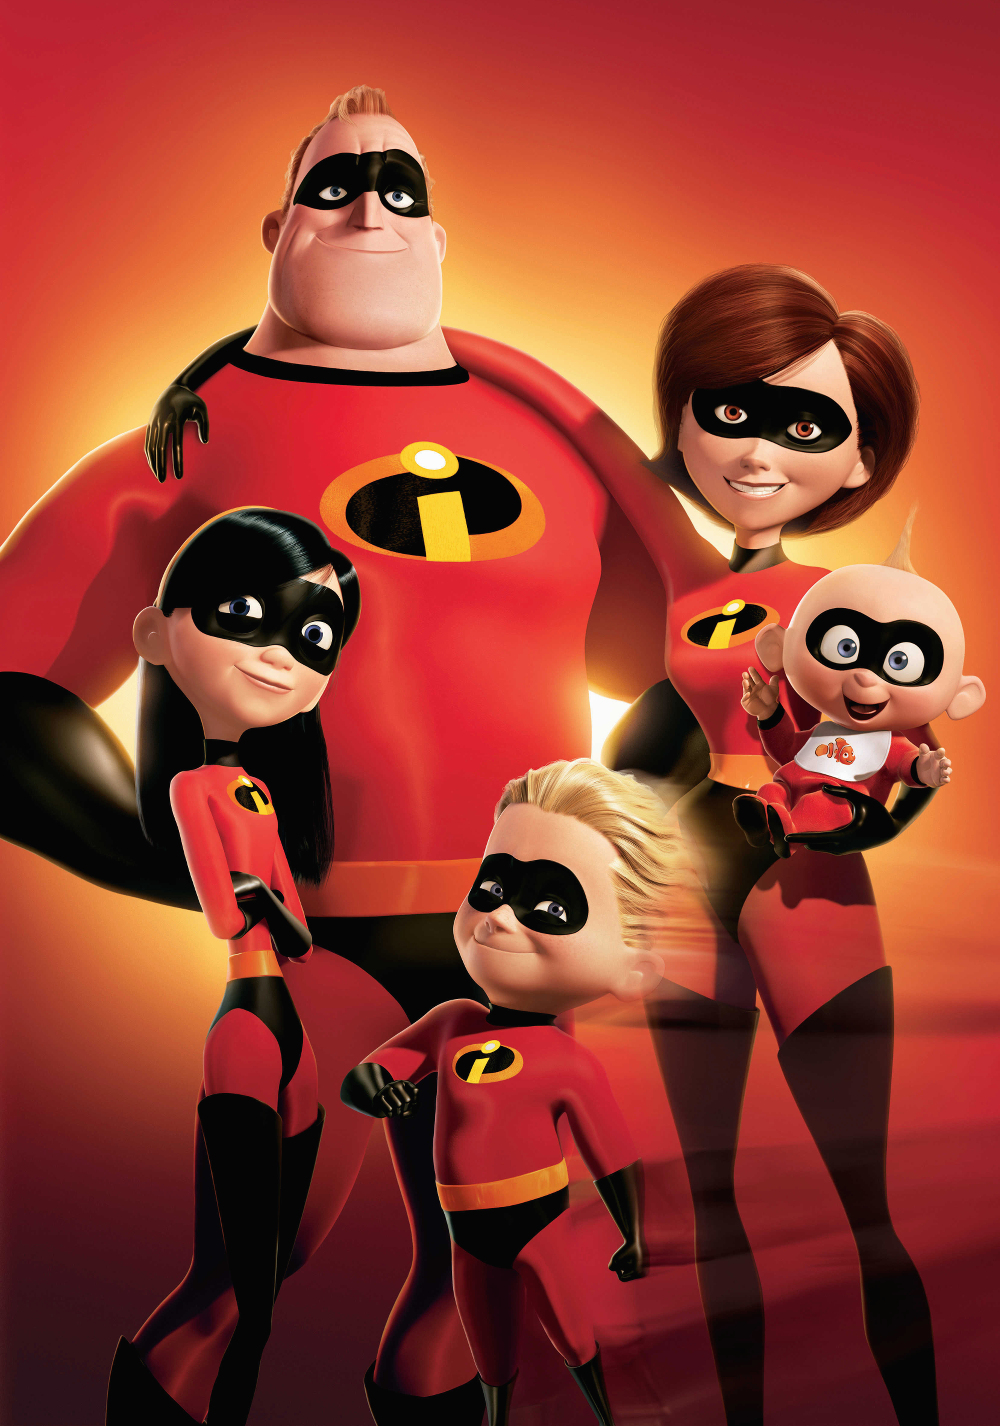 The Incredibles Picture